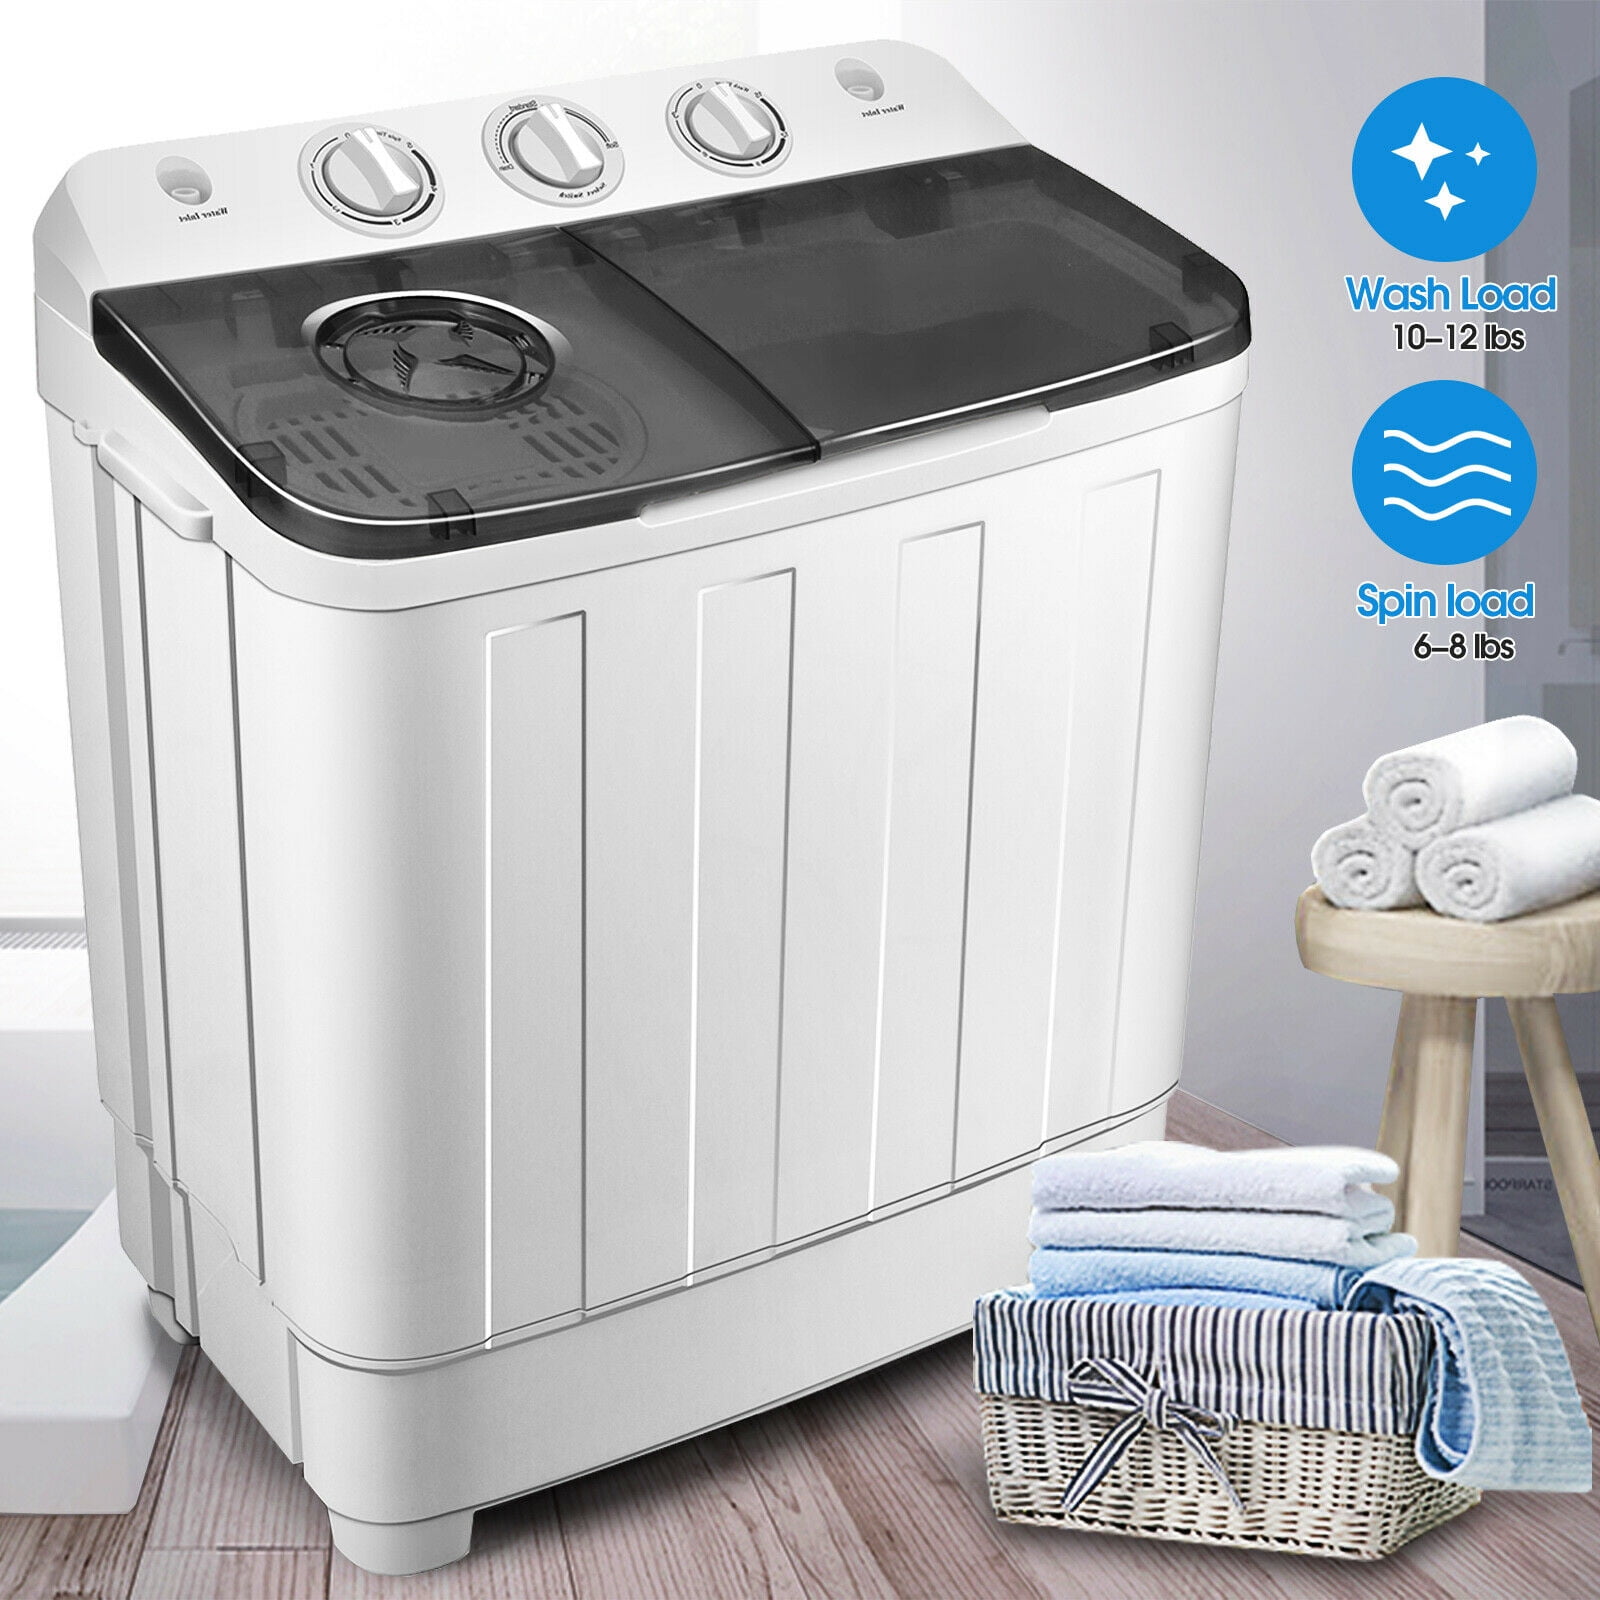 NEW TWIN TUB PORTABLE 230V WASHING MACHINE FOR OUTDOOR GARDEN CAMPING SPIN DRYER 